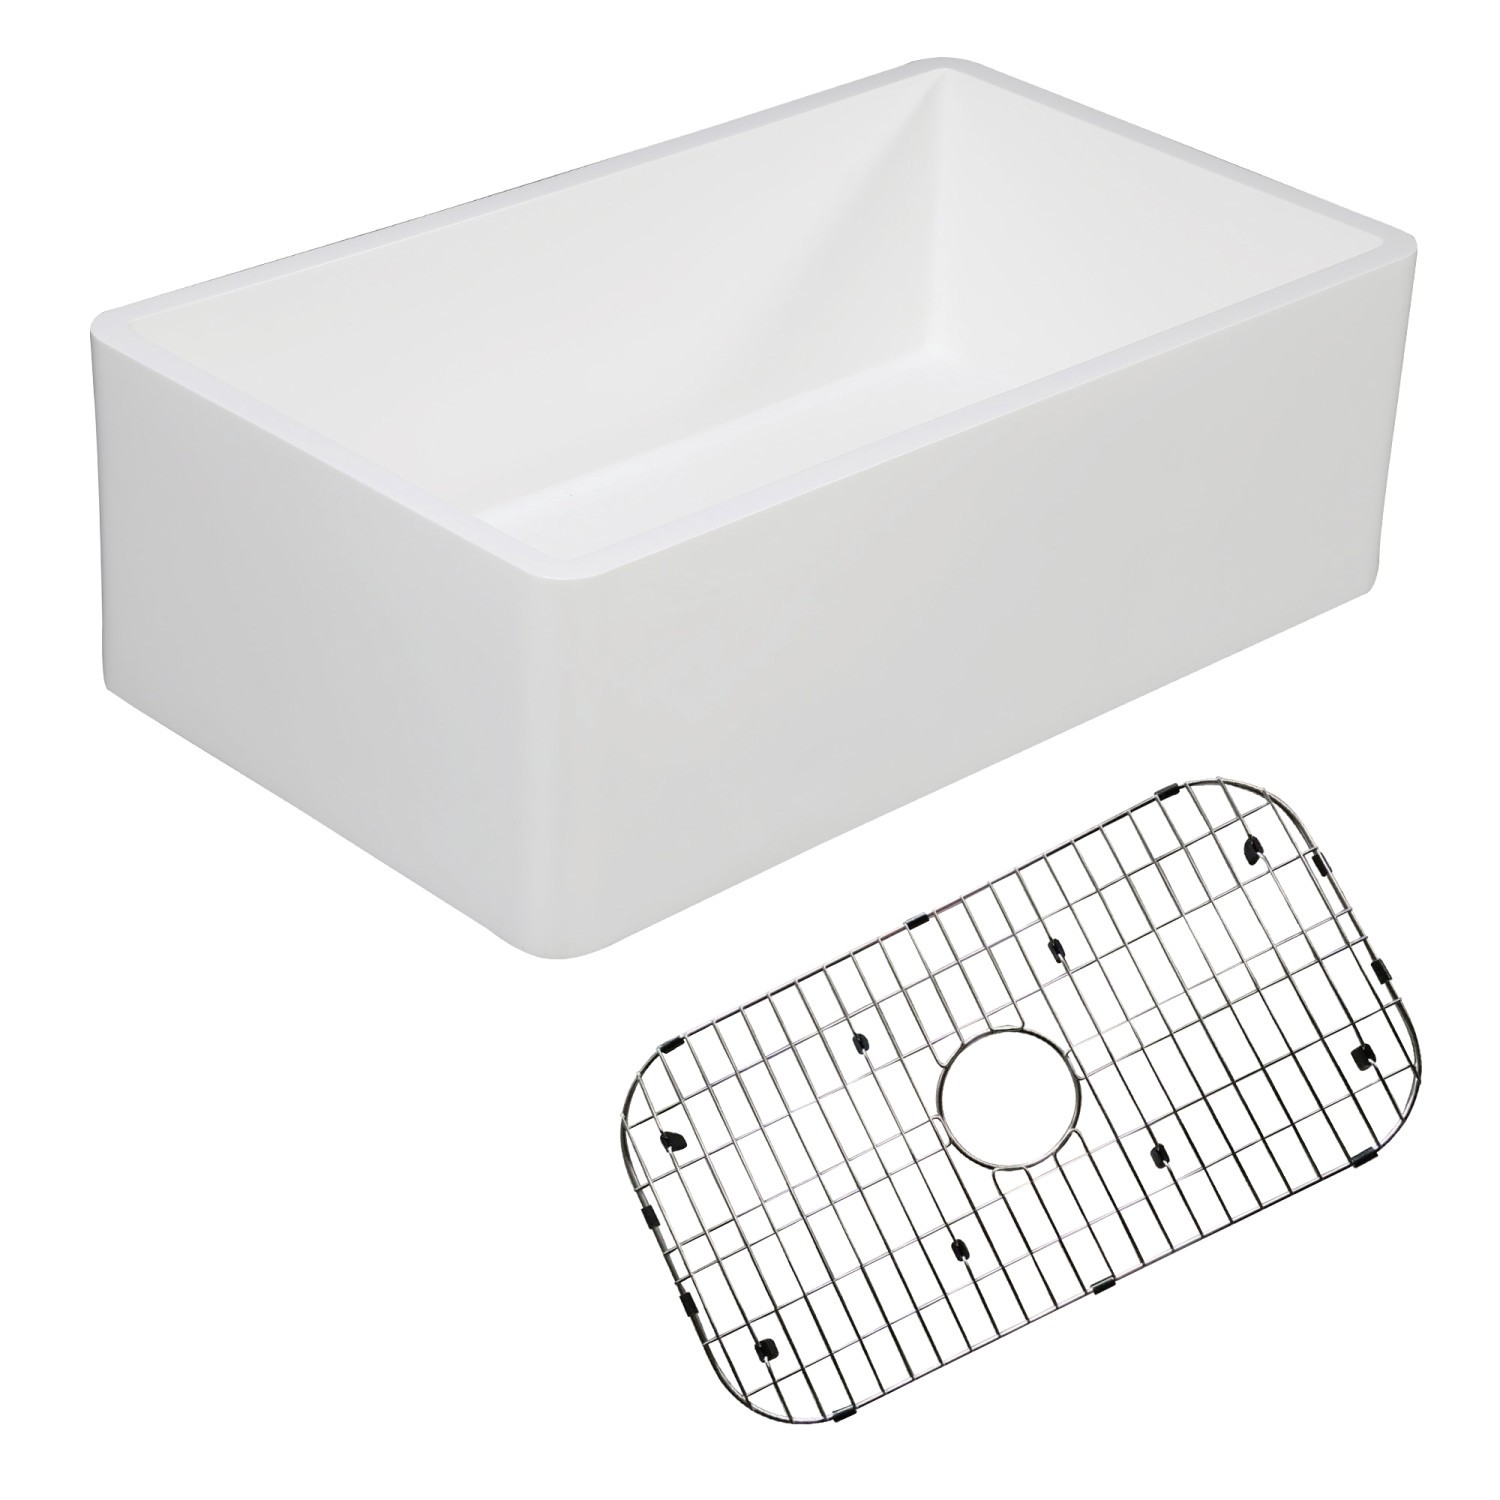 KINGSTON BRASS KGKFA301810BC GOURMETIER 30 INCH SOLID SURFACE MATTE STONE APRON FRONT FARMHOUSE SINGLE BOWL KITCHEN SINK WITH STRAINER AND GRID IN MATTE WHITE/BRUSHED